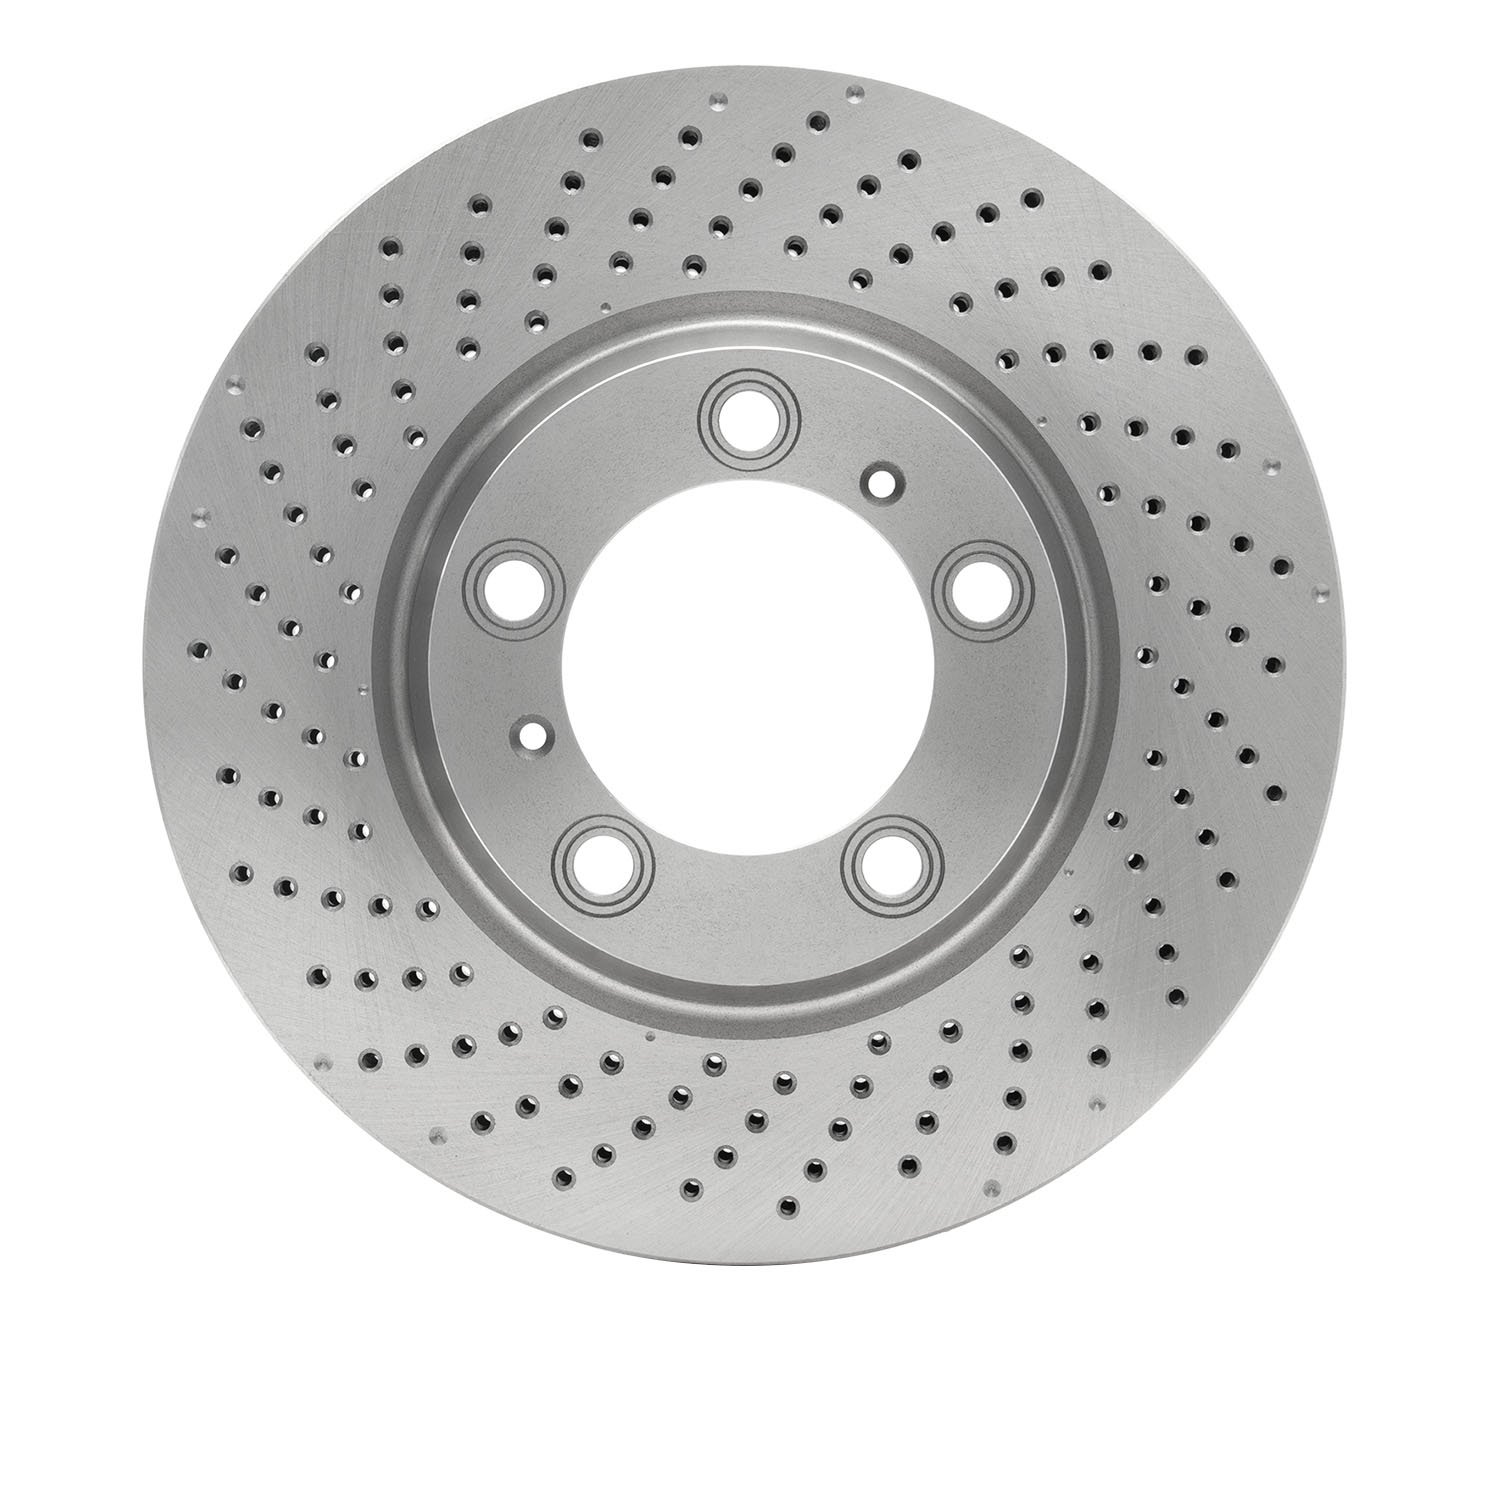 Drilled Brake Rotor, Fits Select Porsche